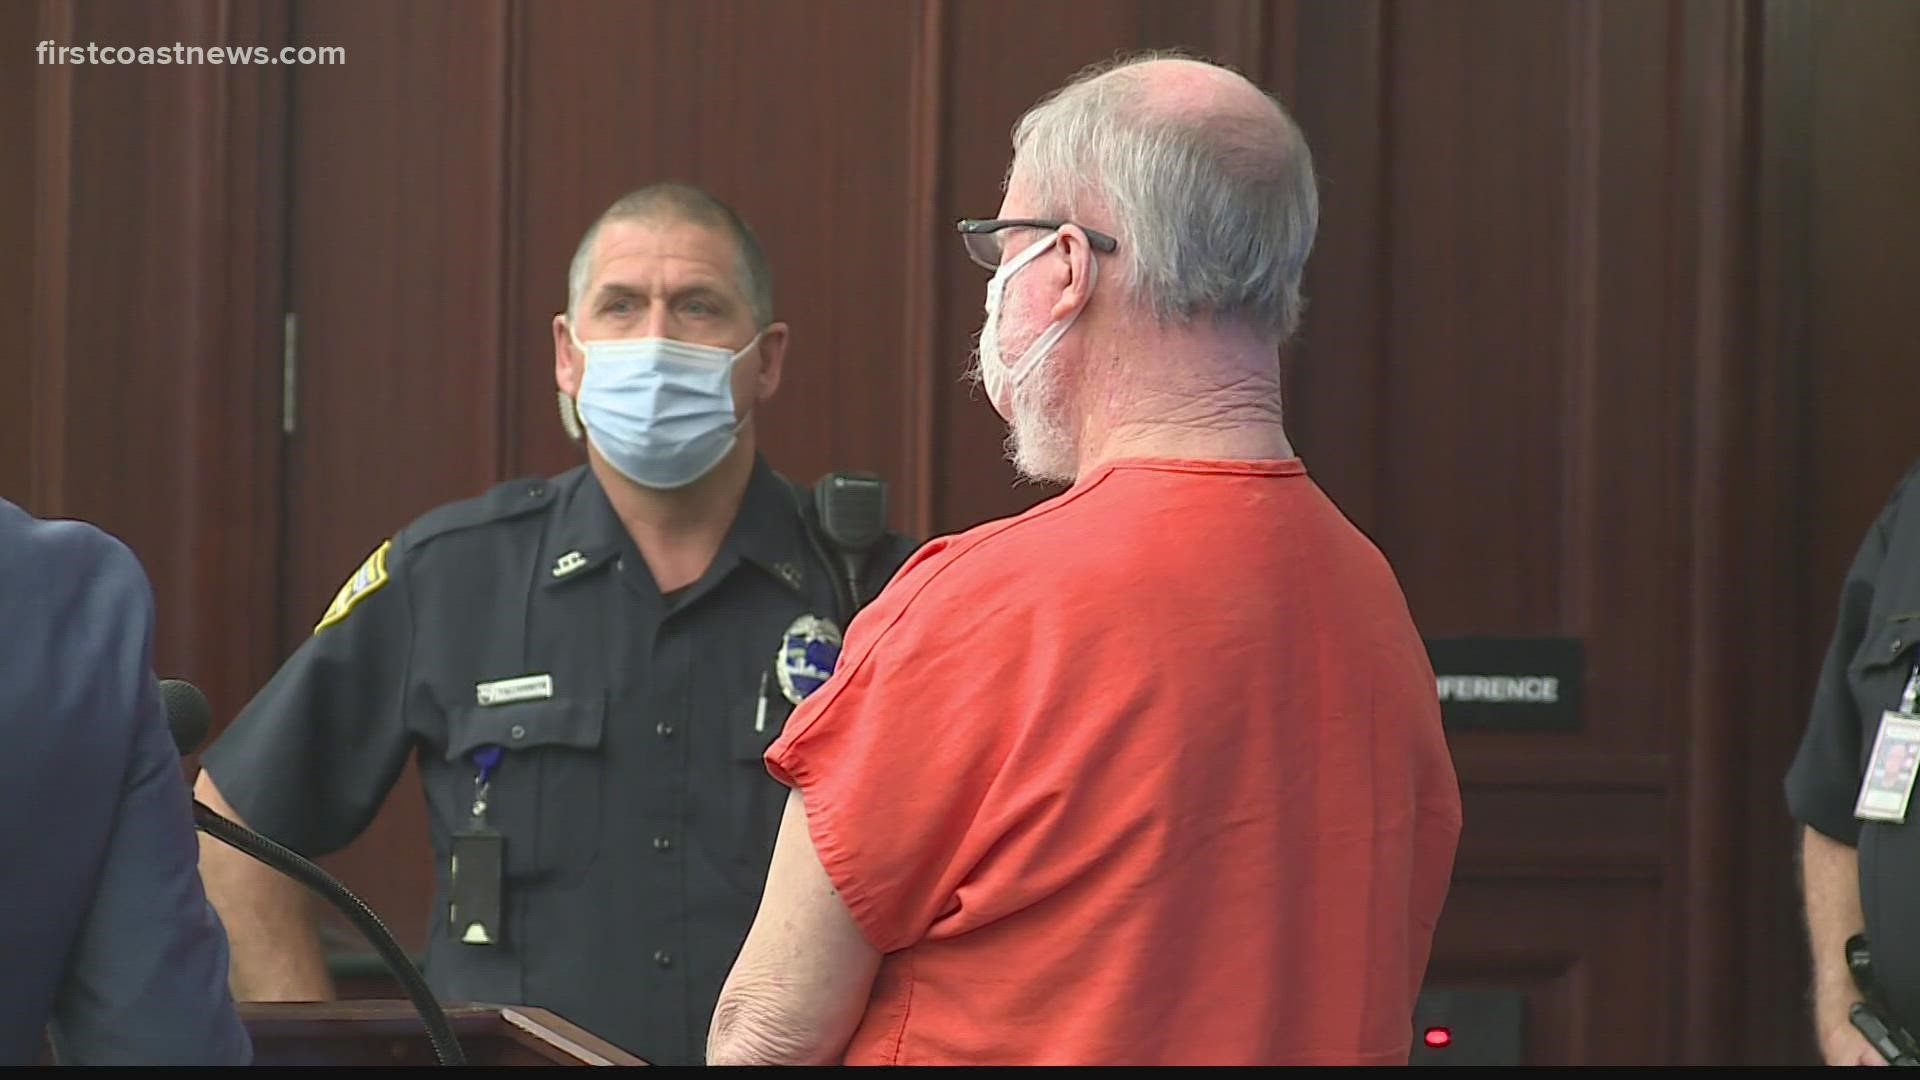 Former JSO homicide detective William Baer, pleaded guilty to avoid the death penalty. Judge said his police service only made his crime 'more horrific.'